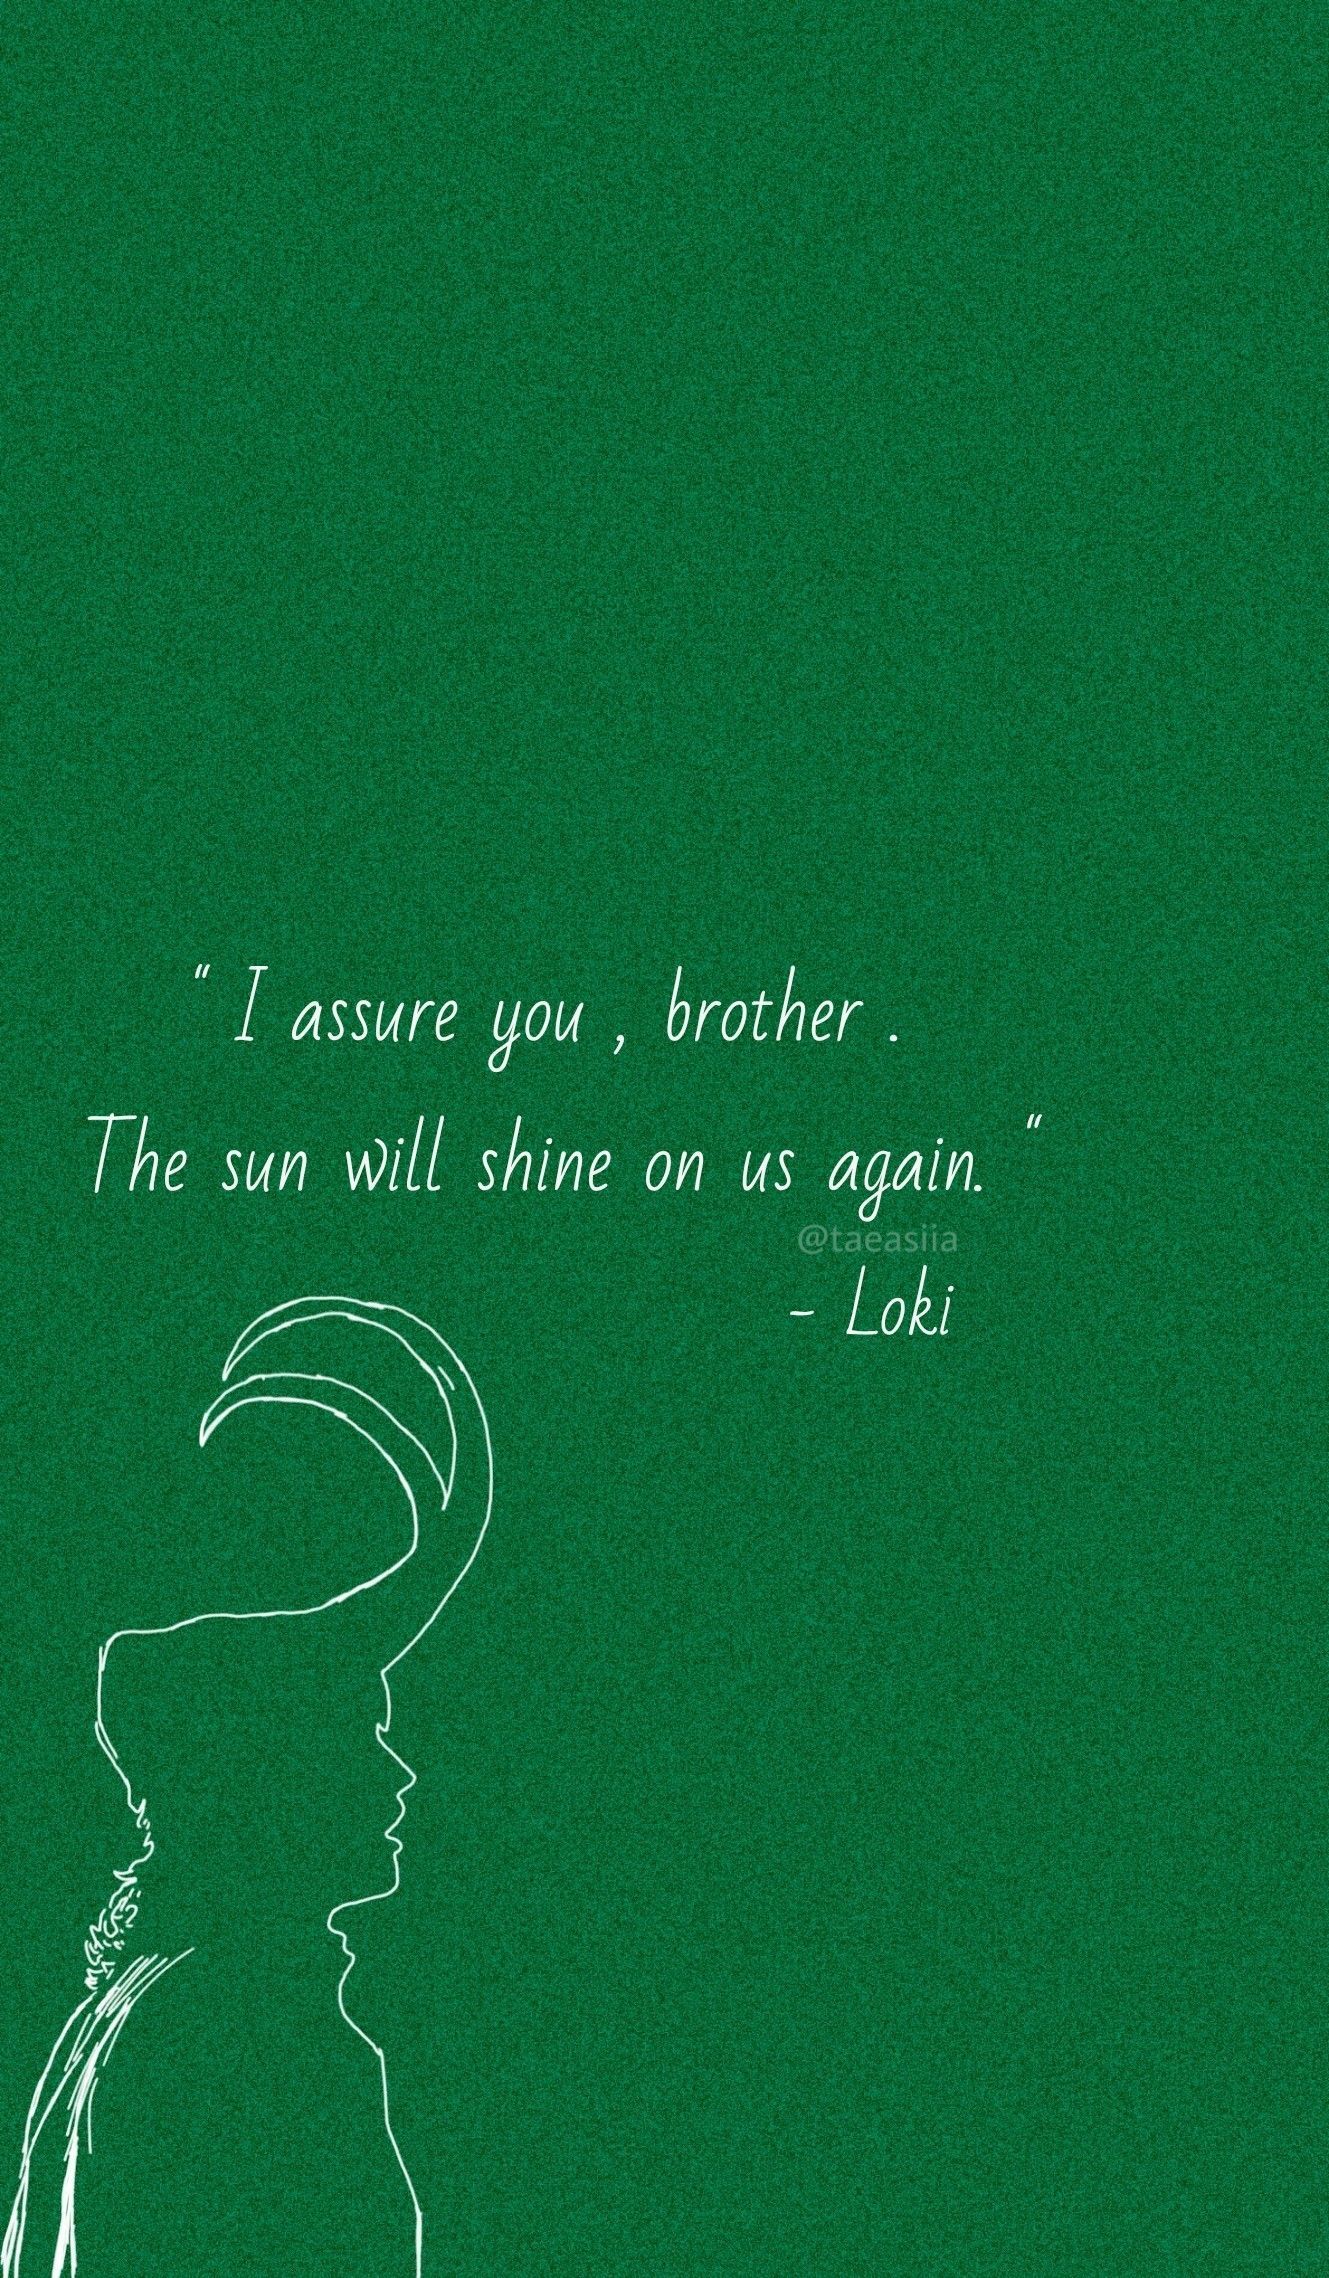 A green background with a white sketch of Loki from Marvel. The quote 